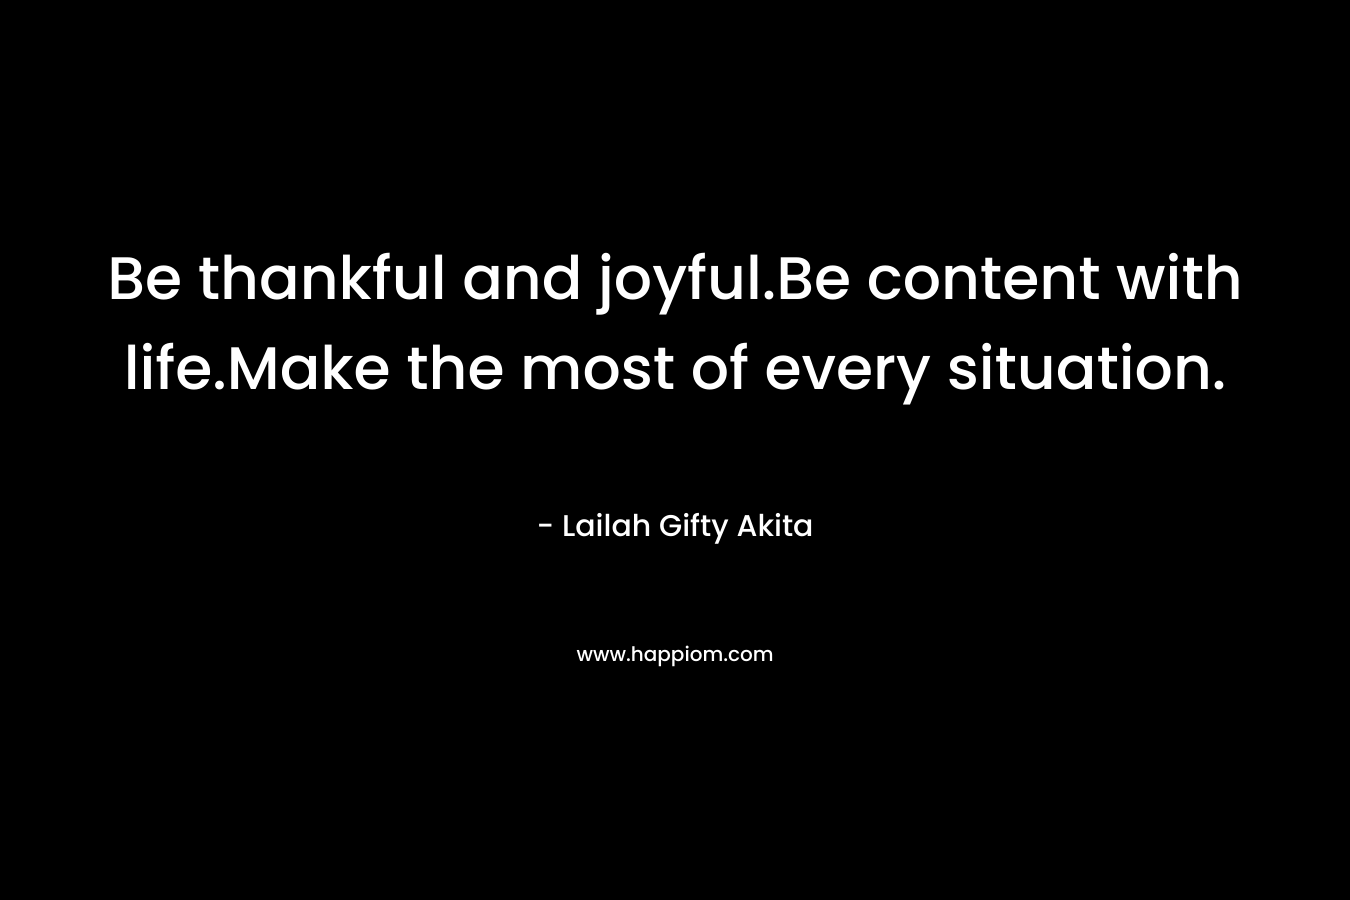 Be thankful and joyful.Be content with life.Make the most of every situation. – Lailah Gifty Akita